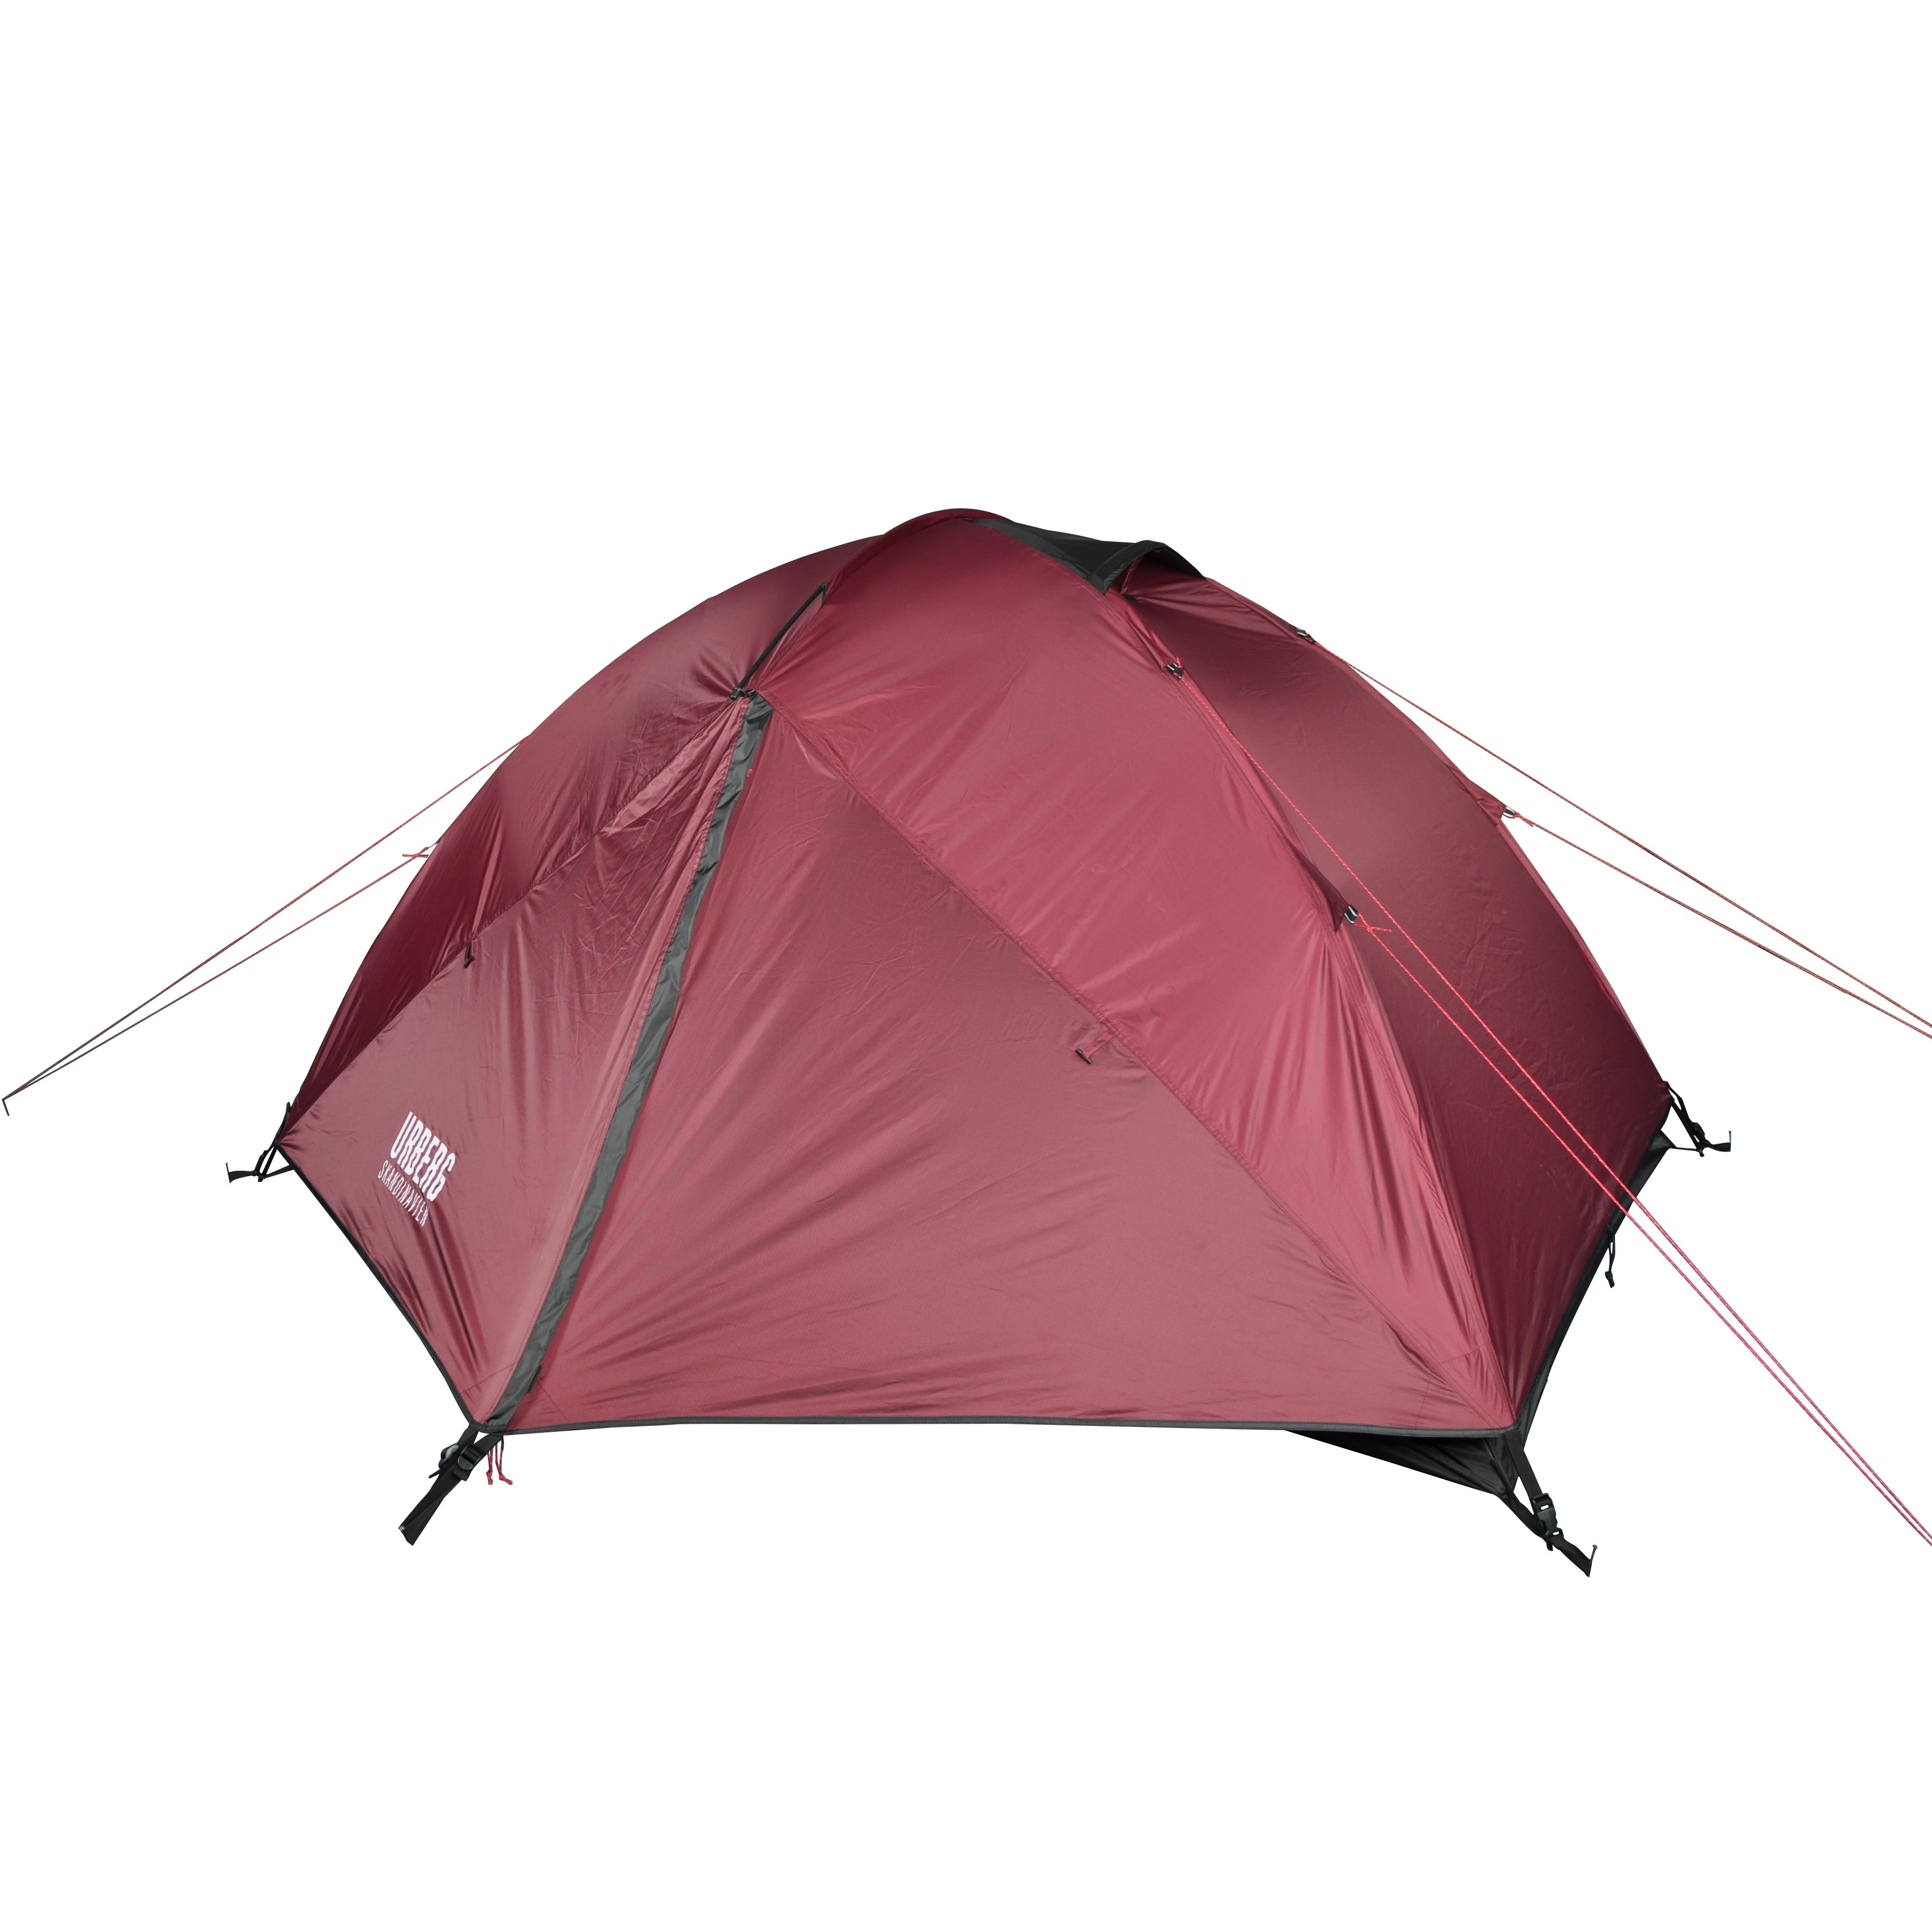 Urberg 2-person Dome Tent G3 Windsor Wine